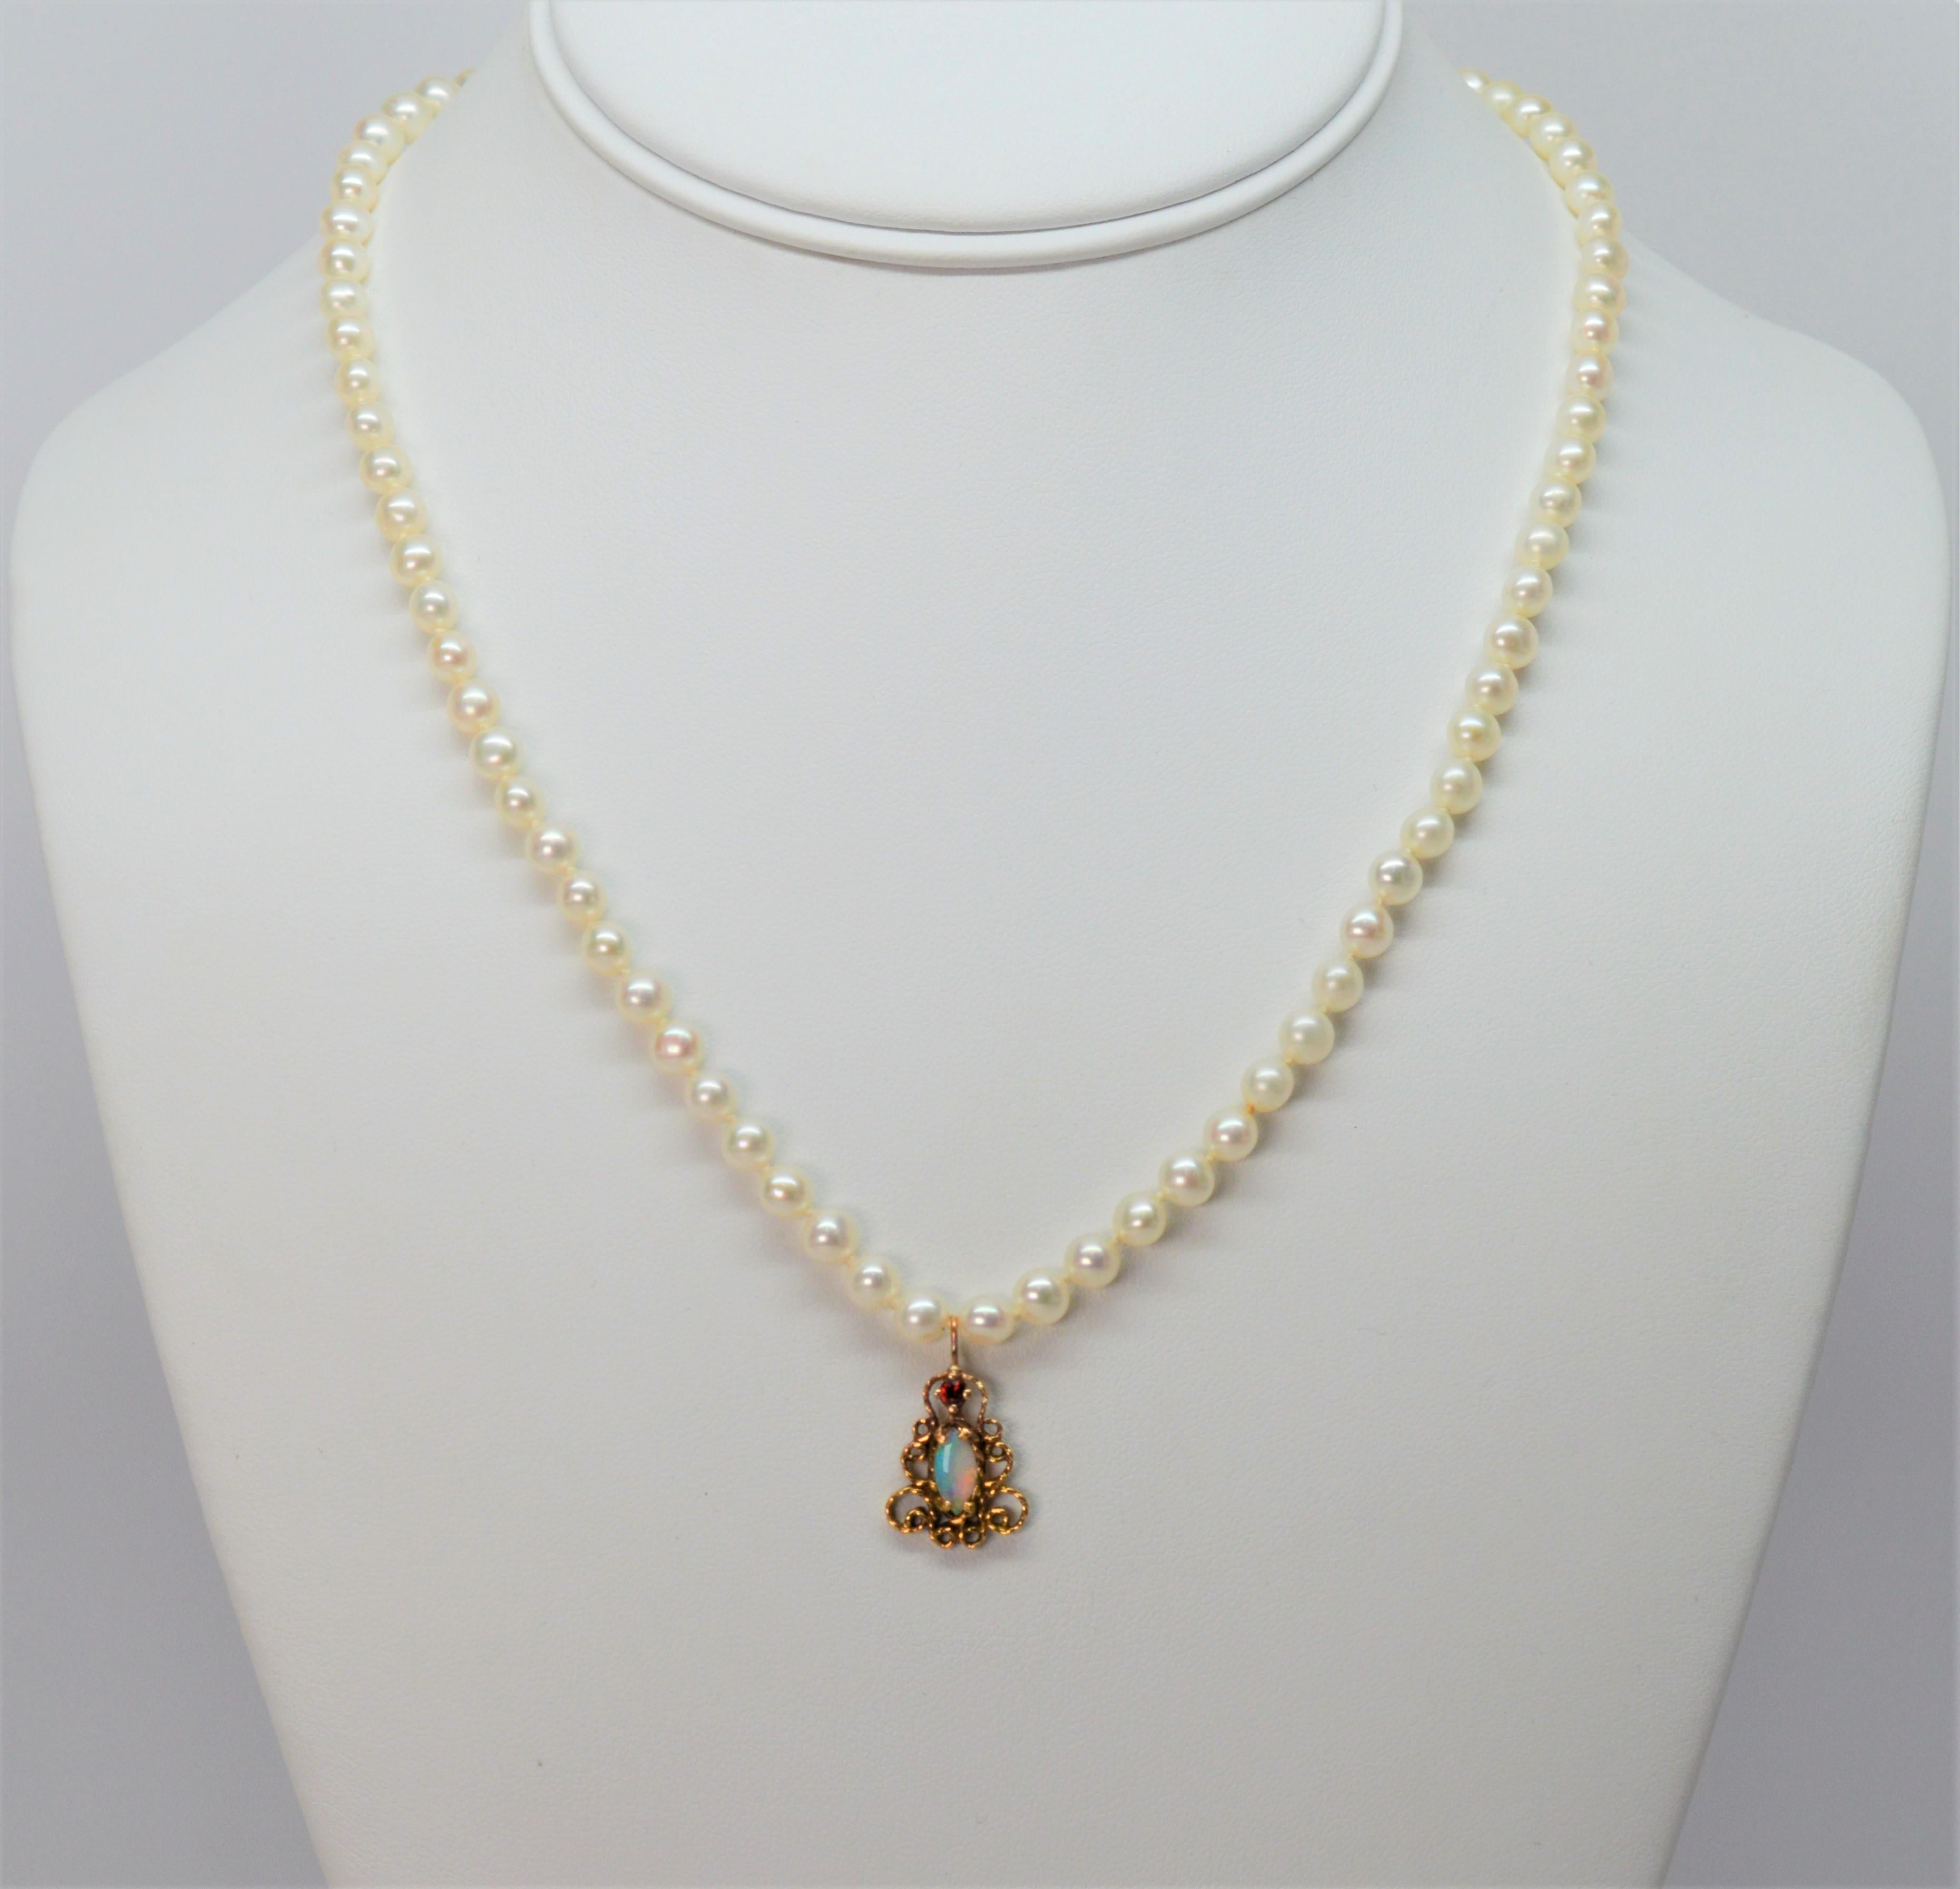 An eighteen inch strand of freshwater 5mm pearls leads to a dainty antique-style 14 karat yellow 3/4 inch gold charm pendant featuring an iridescent opal stone crowned with a petite red ruby. This darling necklace is finished with a 14 karat yellow